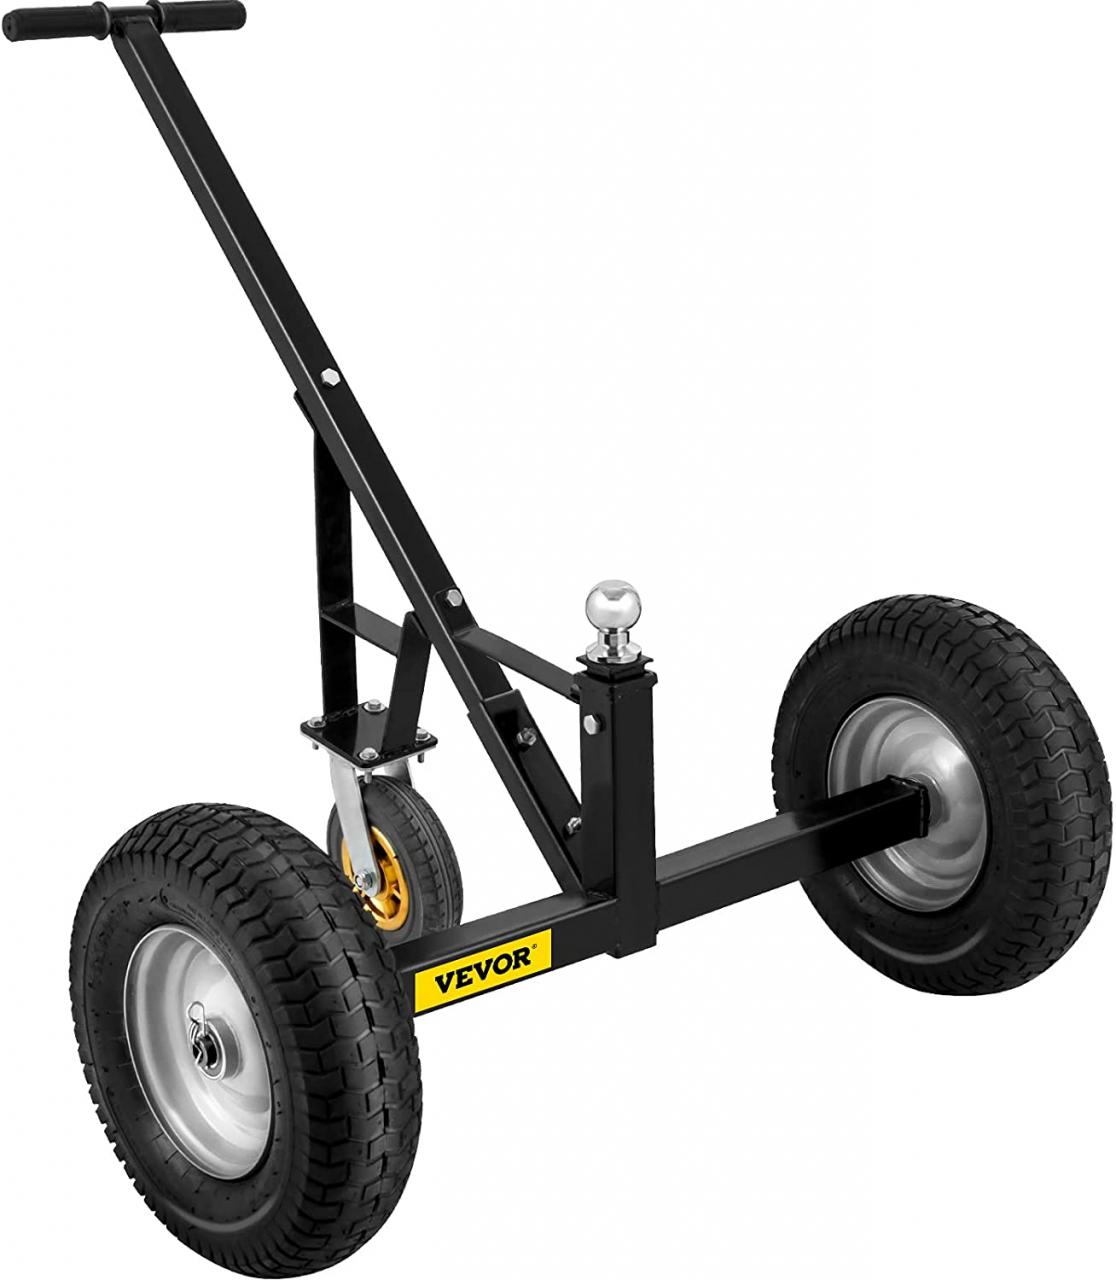 Buy VEVOR Adjustable Trailer Dolly, 800 Lbs Capacity Trailer Mover Dolly,  15.7 -23.6 Adjustable Height, 2 Ball Trailer Mover with 16 Wheels, Heavy-Duty  Tow Dolly for Car, RV, Boat Online in Taiwan. B099J52QDT